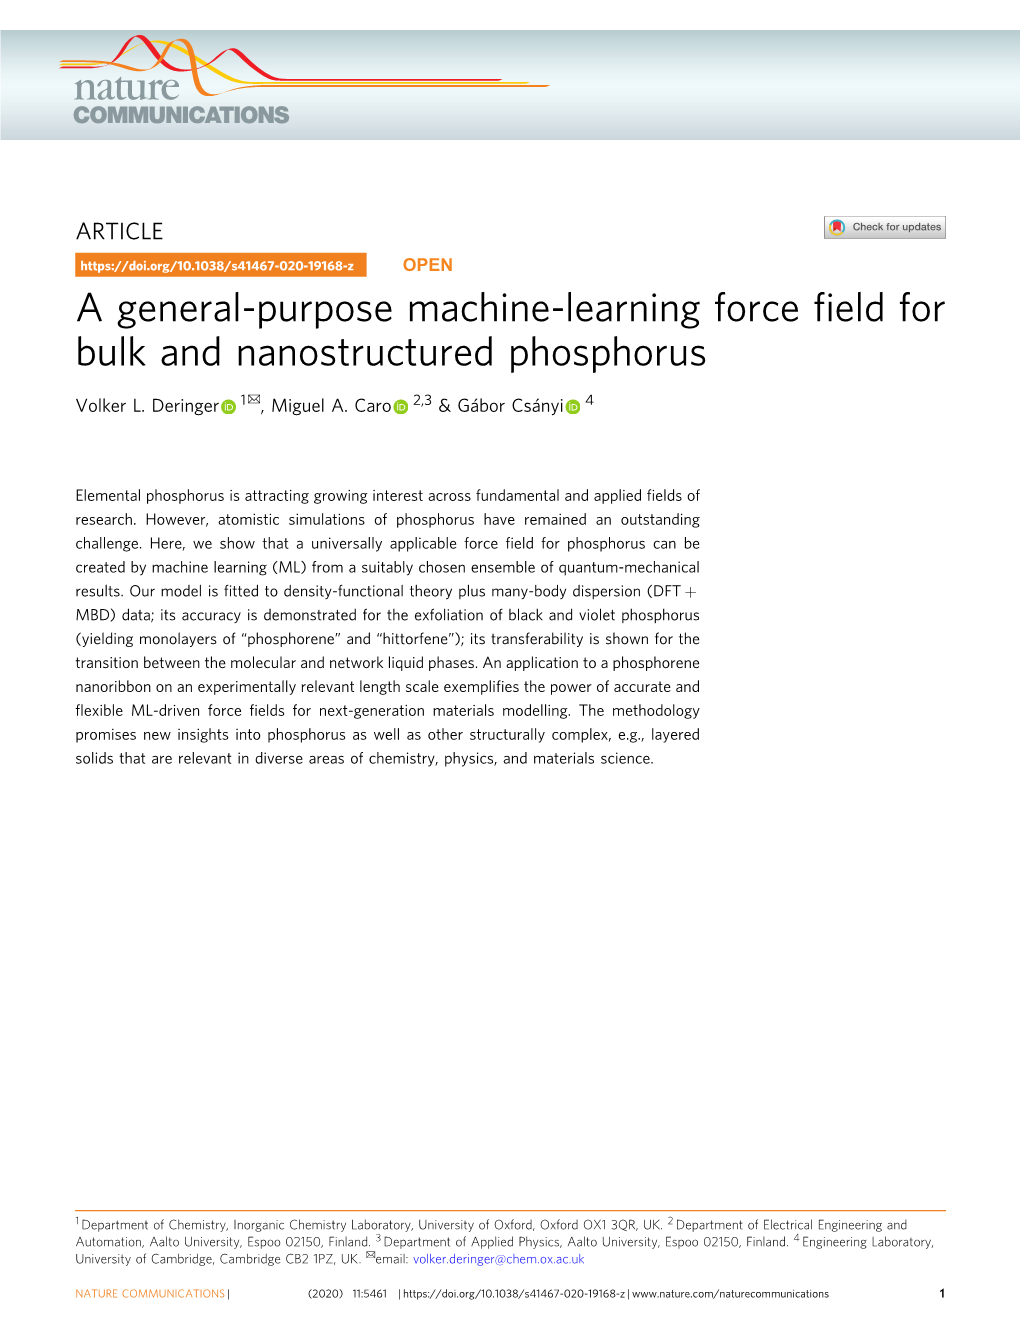 A General-Purpose Machine-Learning Force Field for Bulk And